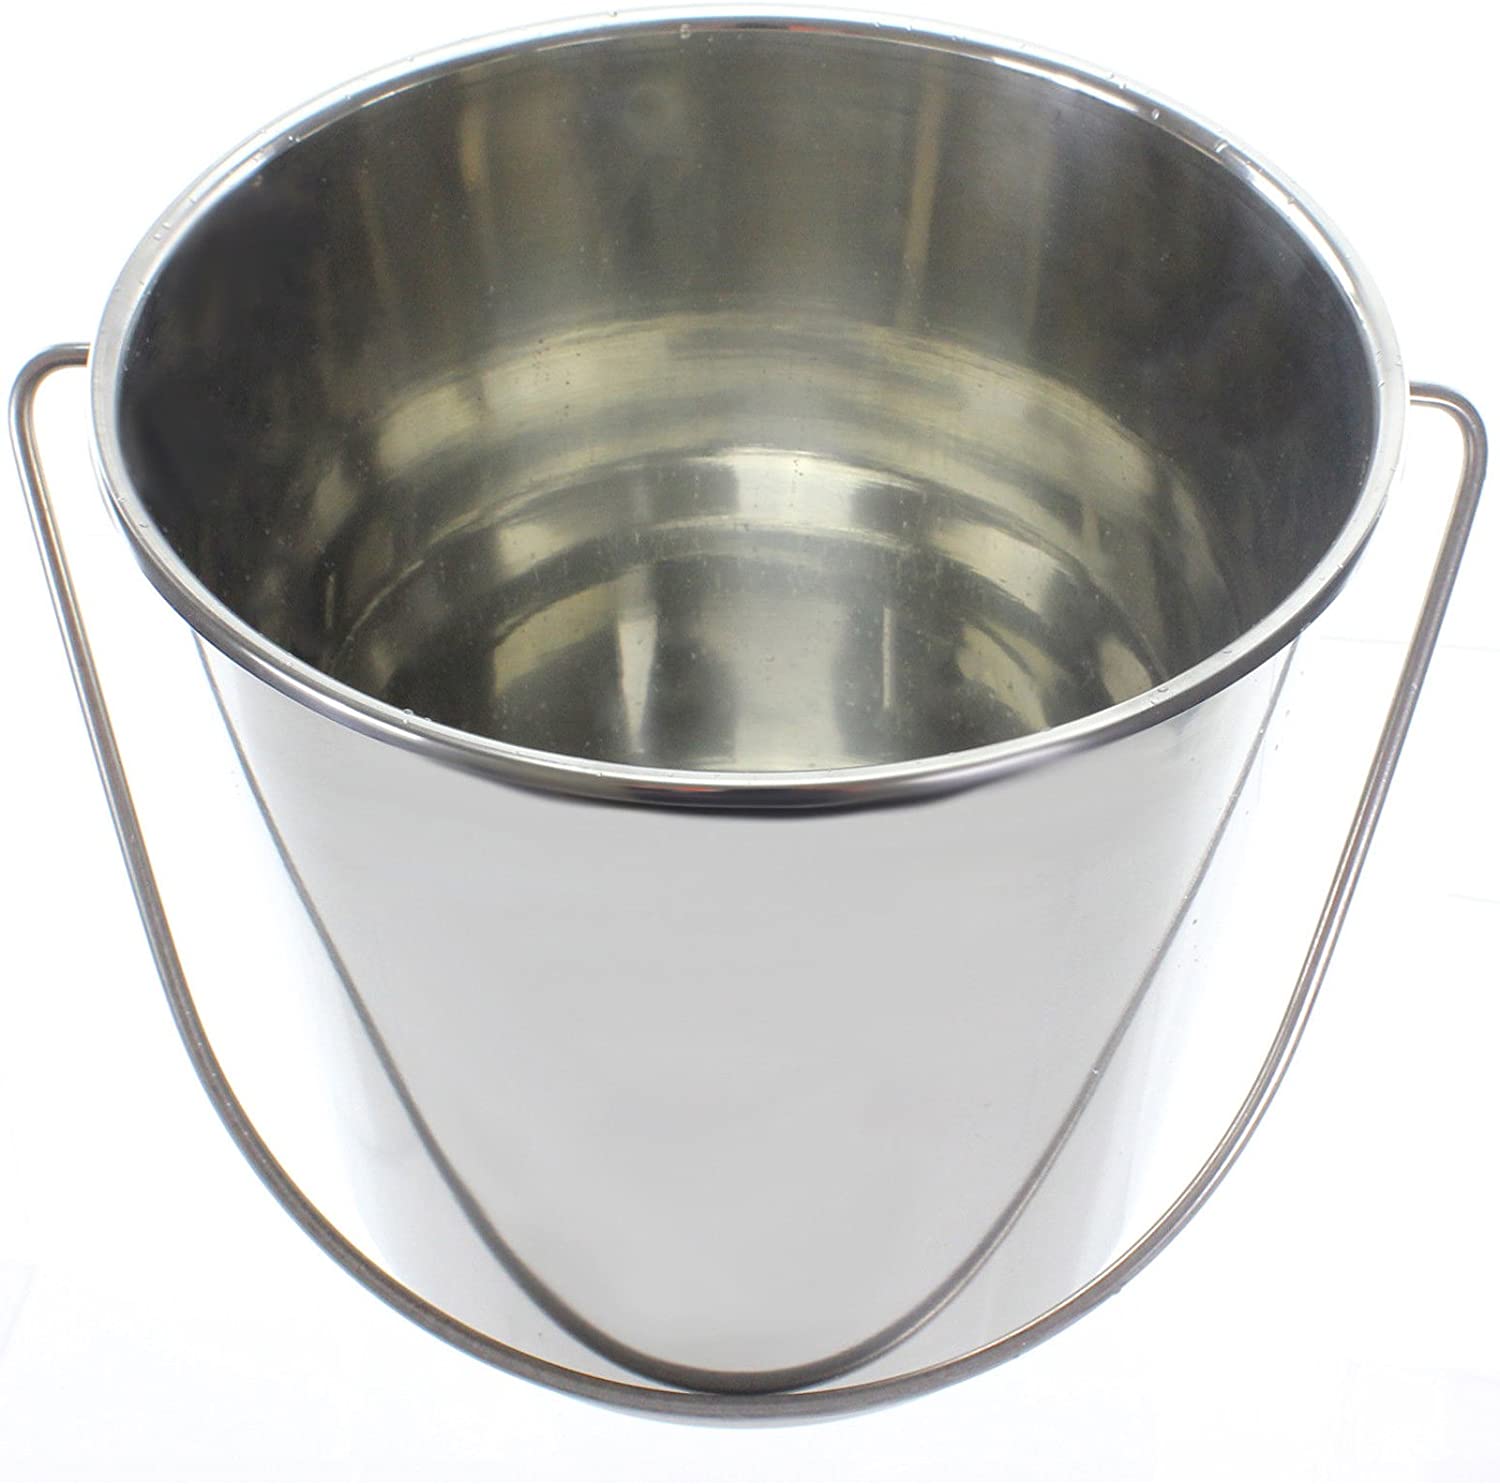 12 Litre Stainless Steel Handled Pail Bucket for Champagne & Ice (Silver, Pack of 2 Buckets)